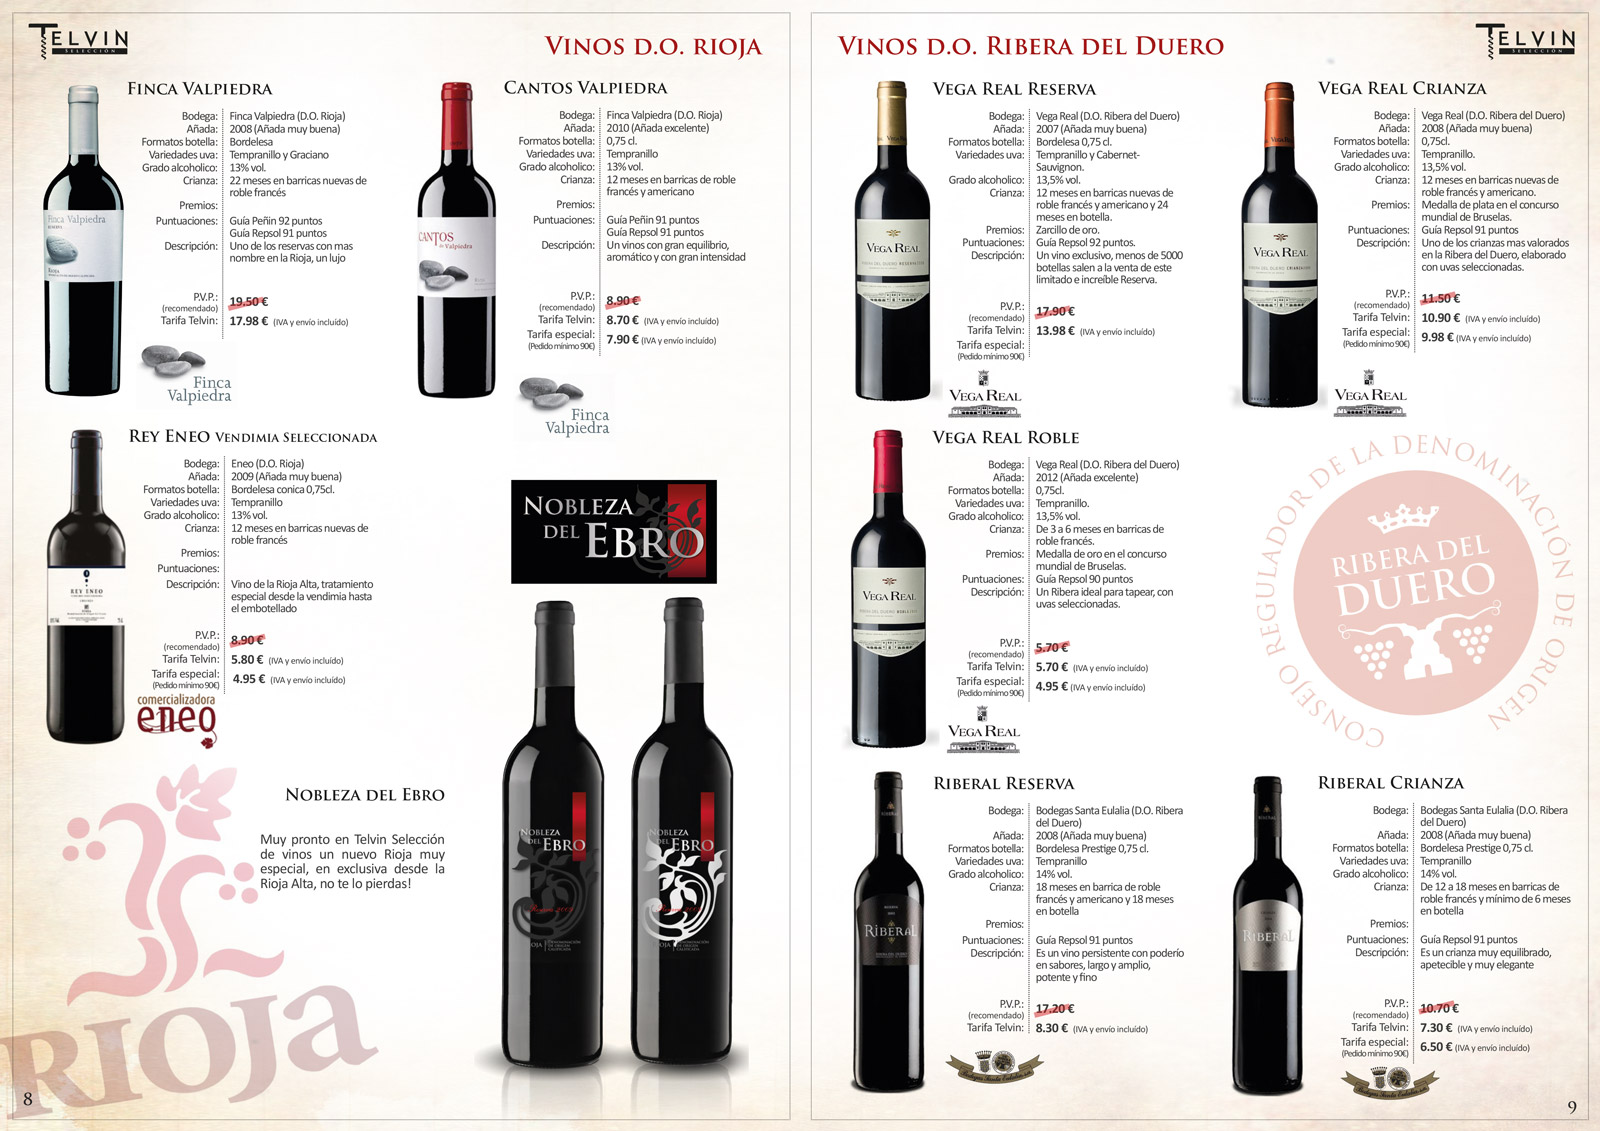 Portfolio of design works for the creation of logos and brands for the wine merchant winery worldwide